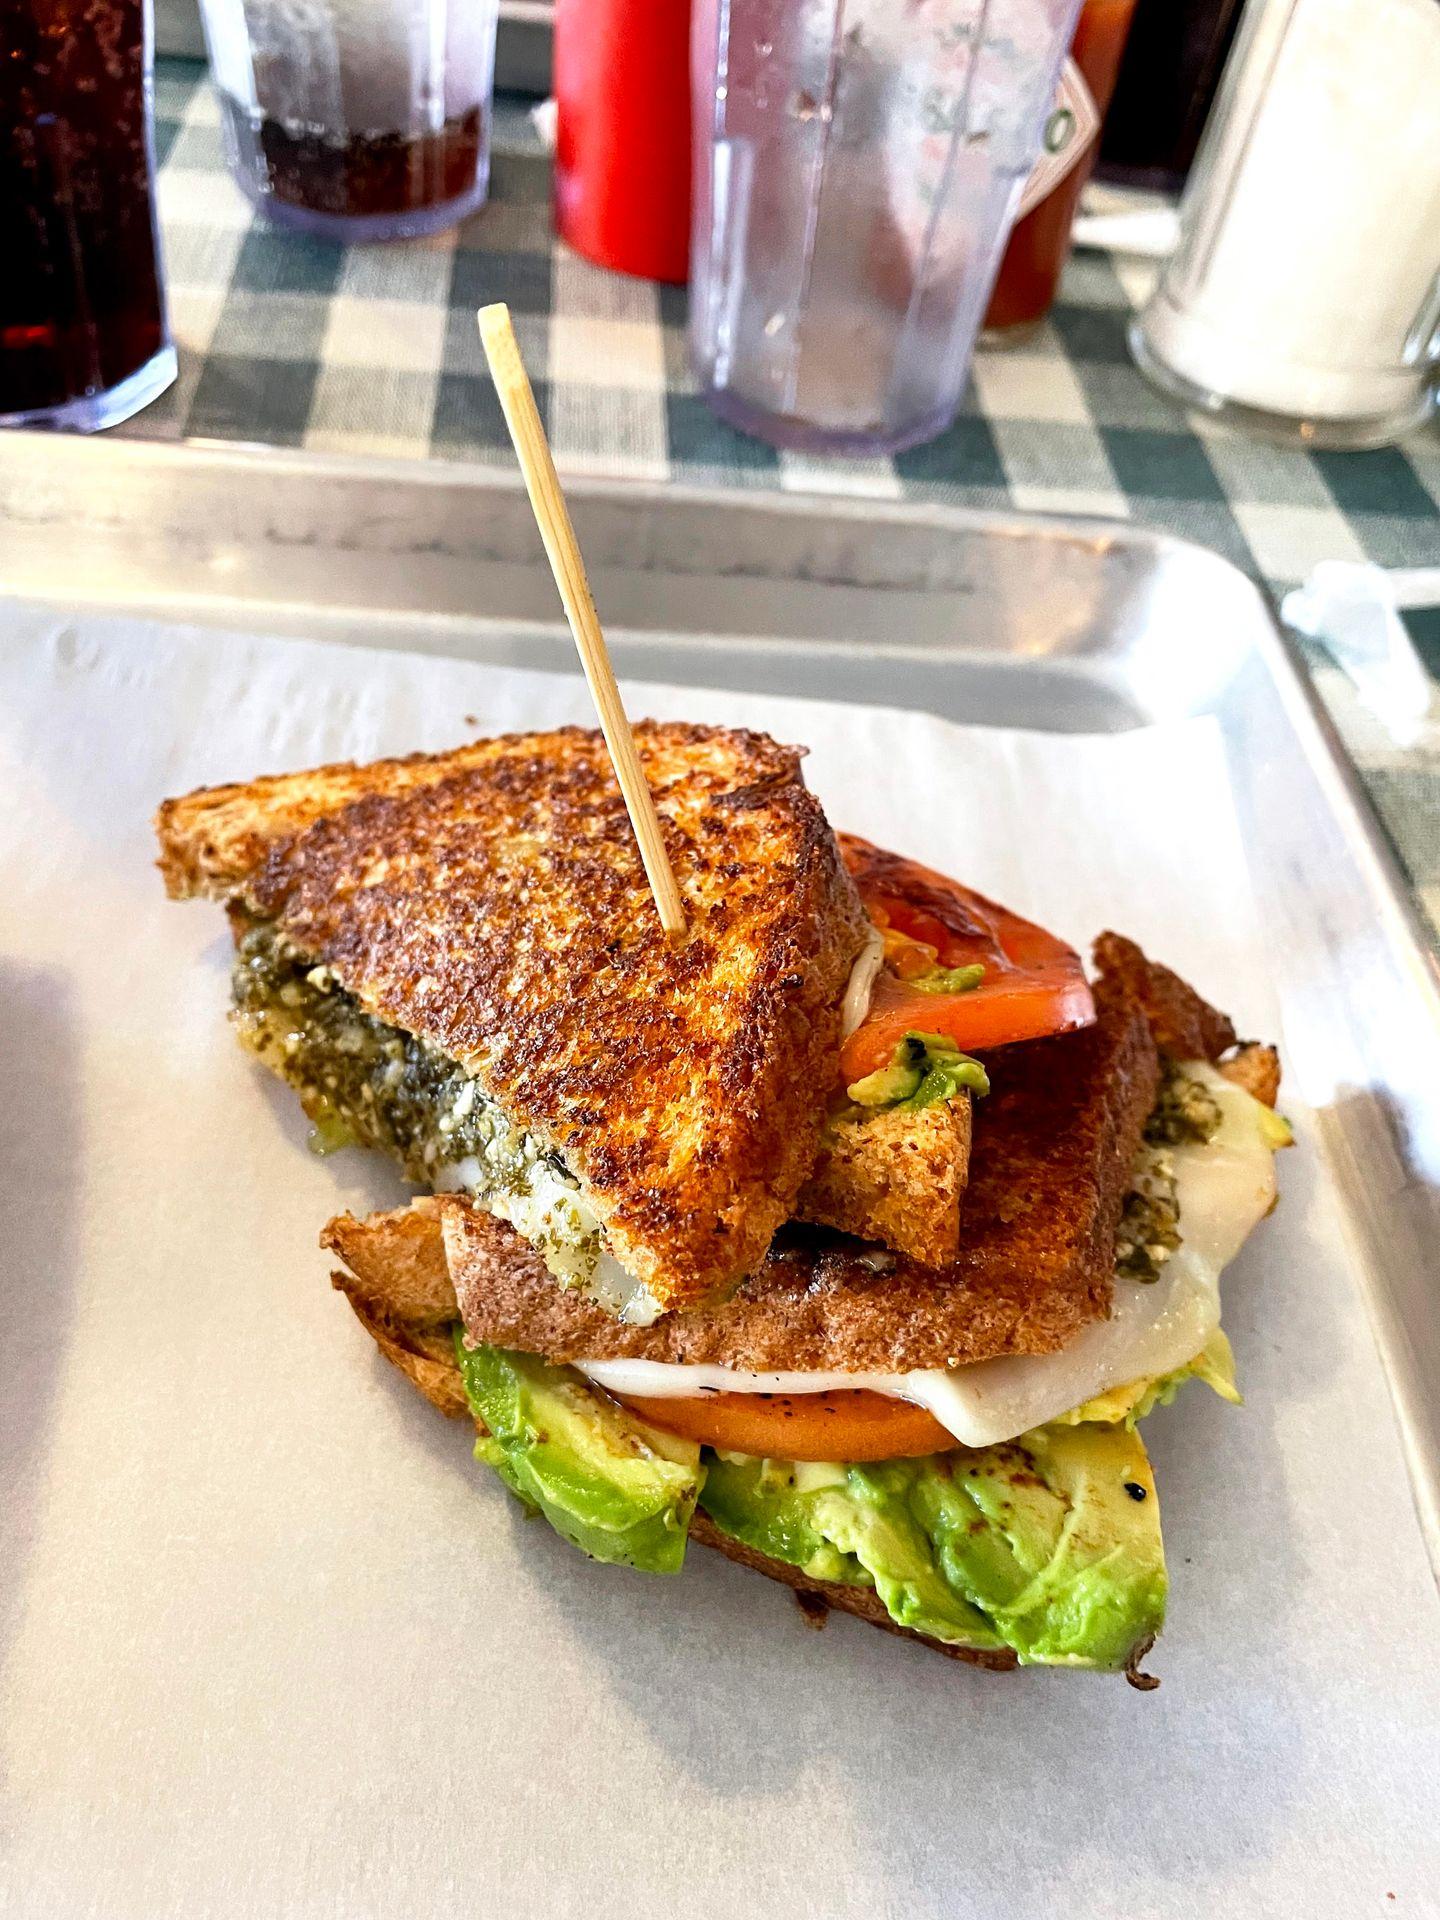 A sandwich with avocado, tomato, pesto and cheese from Wimberley Cafe